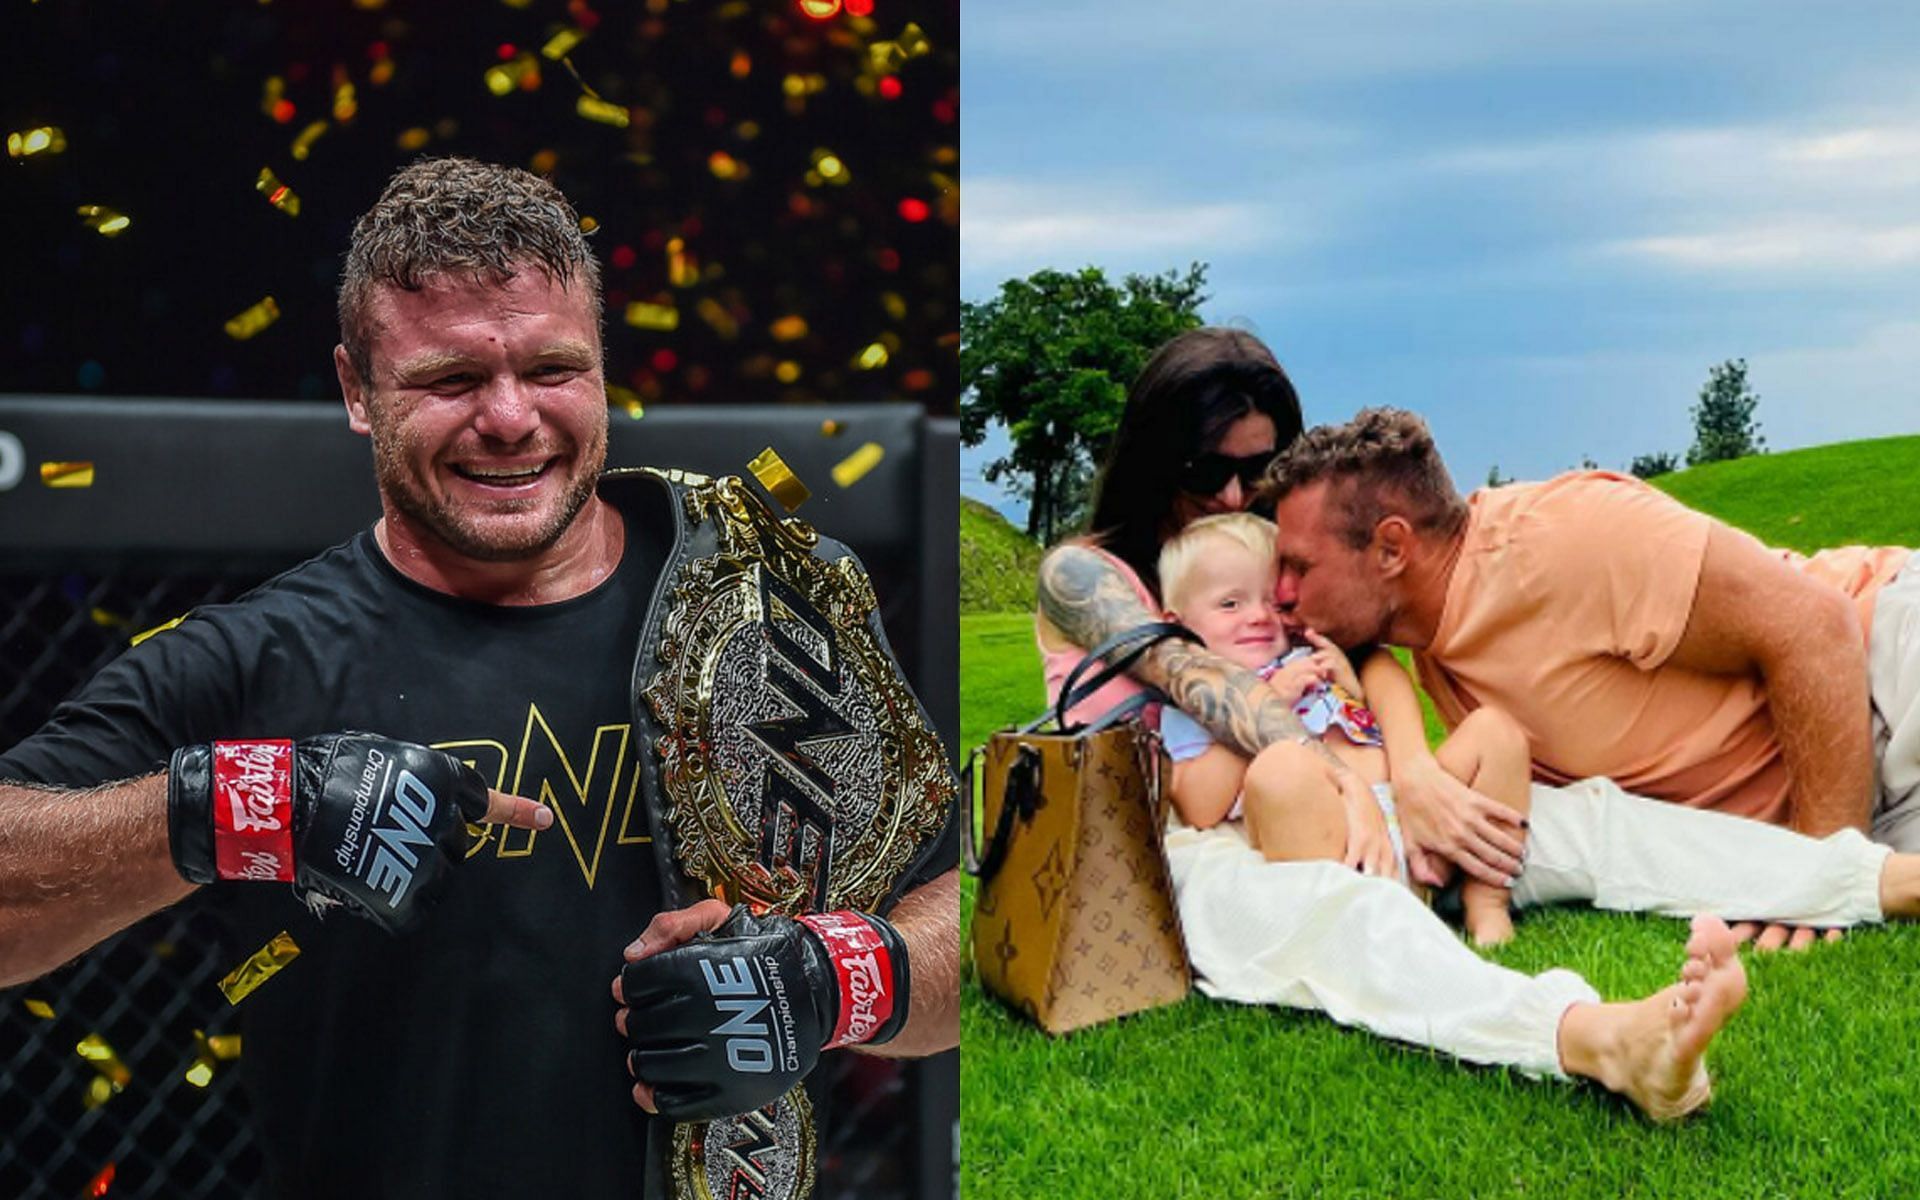 Anatoly Malykhin is having a dream run, thanks to the support of his wife. | [Photos: ONE Championship/ @anmalykhin on Instagram]